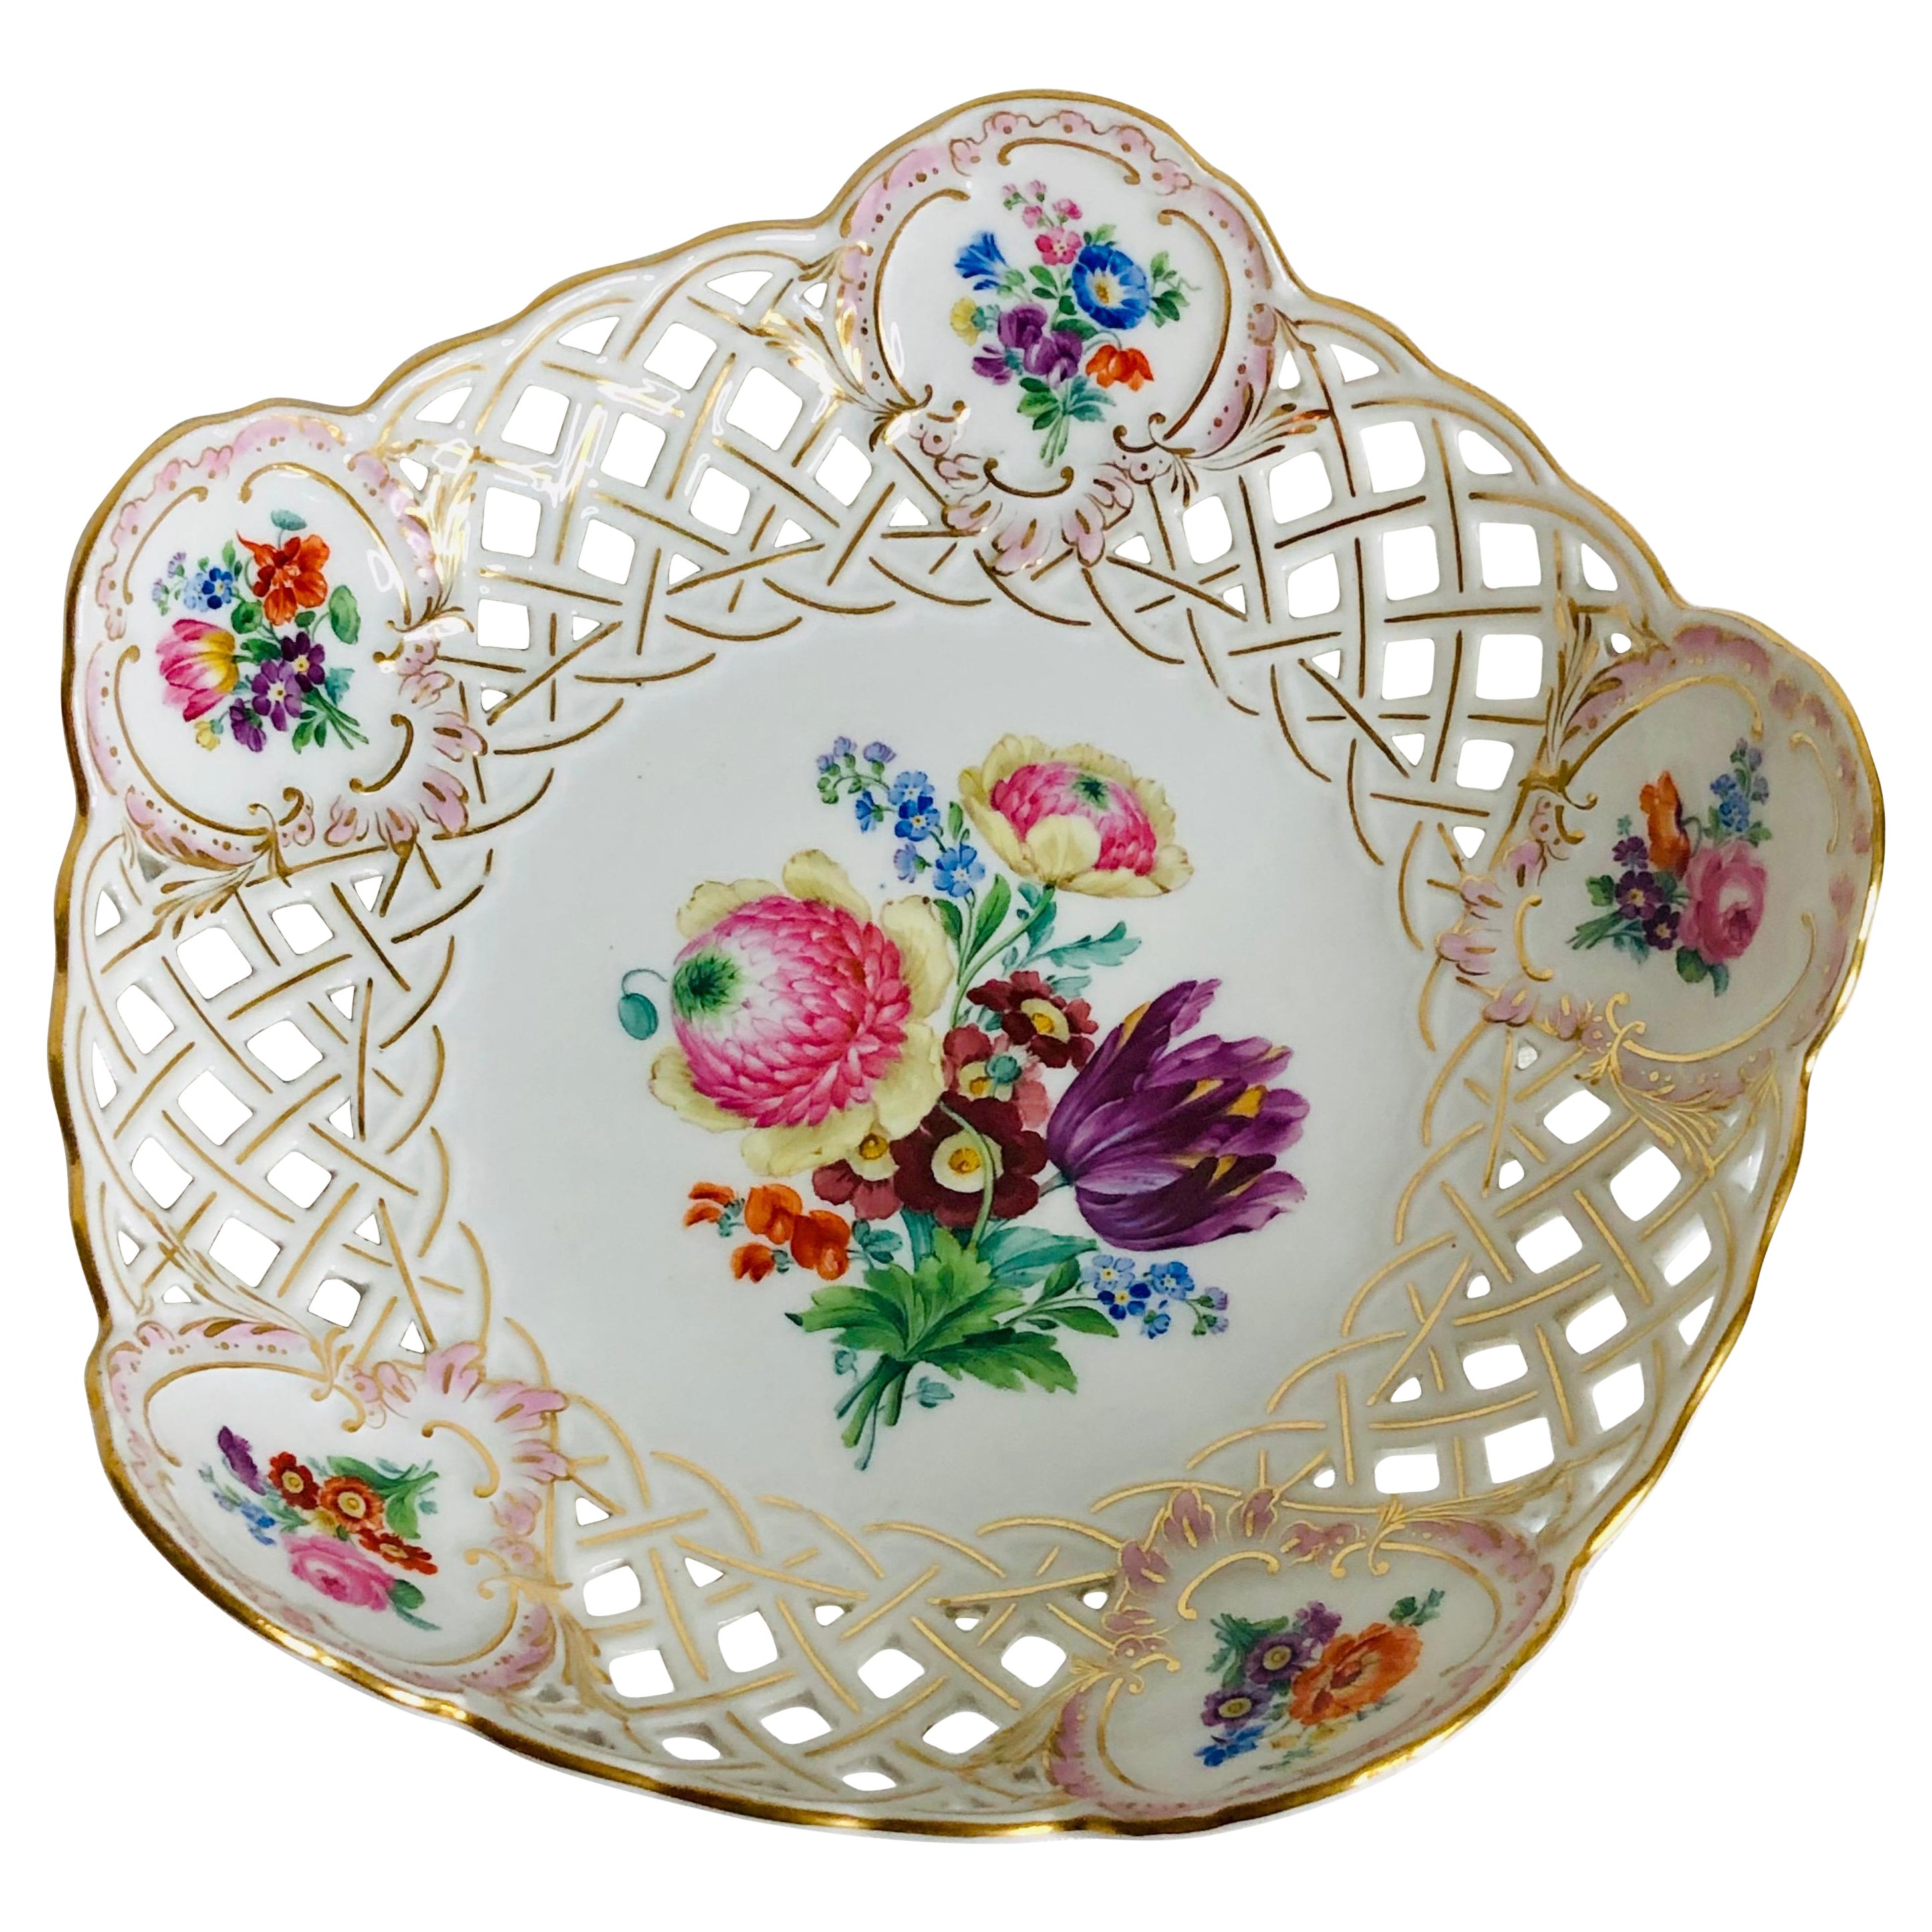 Meissen Reticulated Fluted Bowl with a Bright & Colorful Central Flower Bouquet